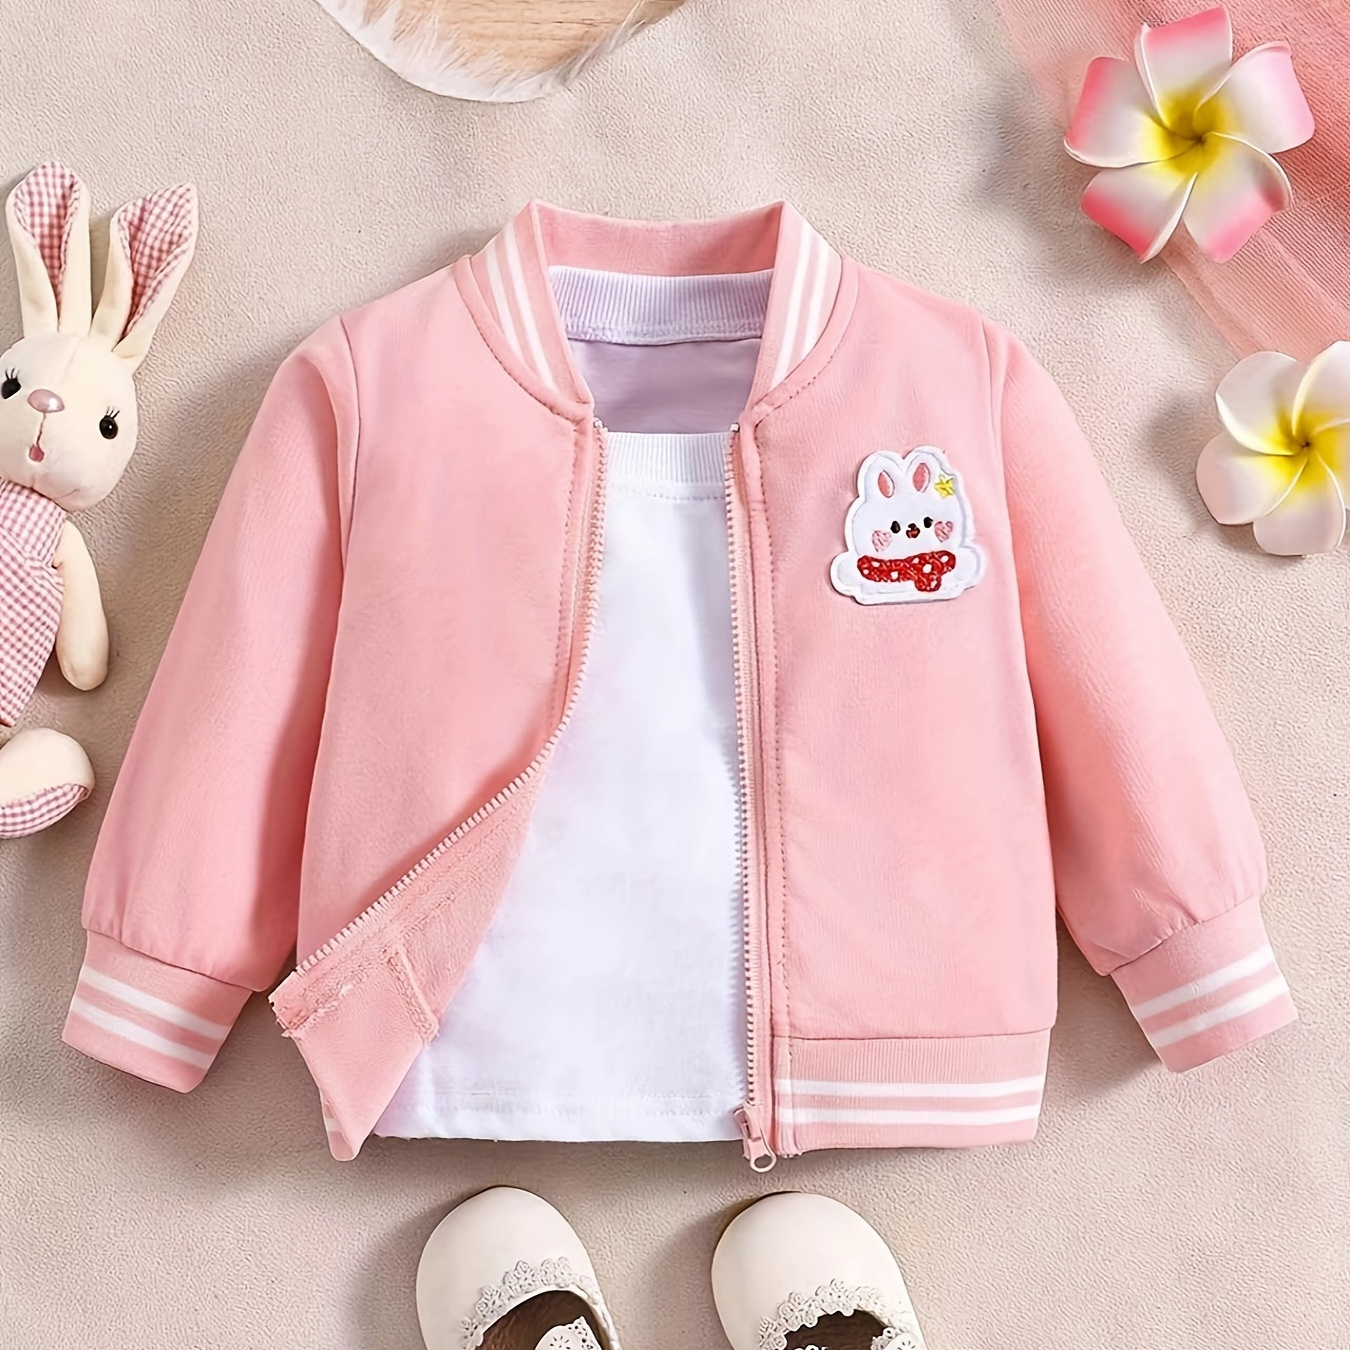 

Baby Girls Toddlers Fashion Cute Cartoon Rabbit Pattern Spring And Autumn New Jacket Coat